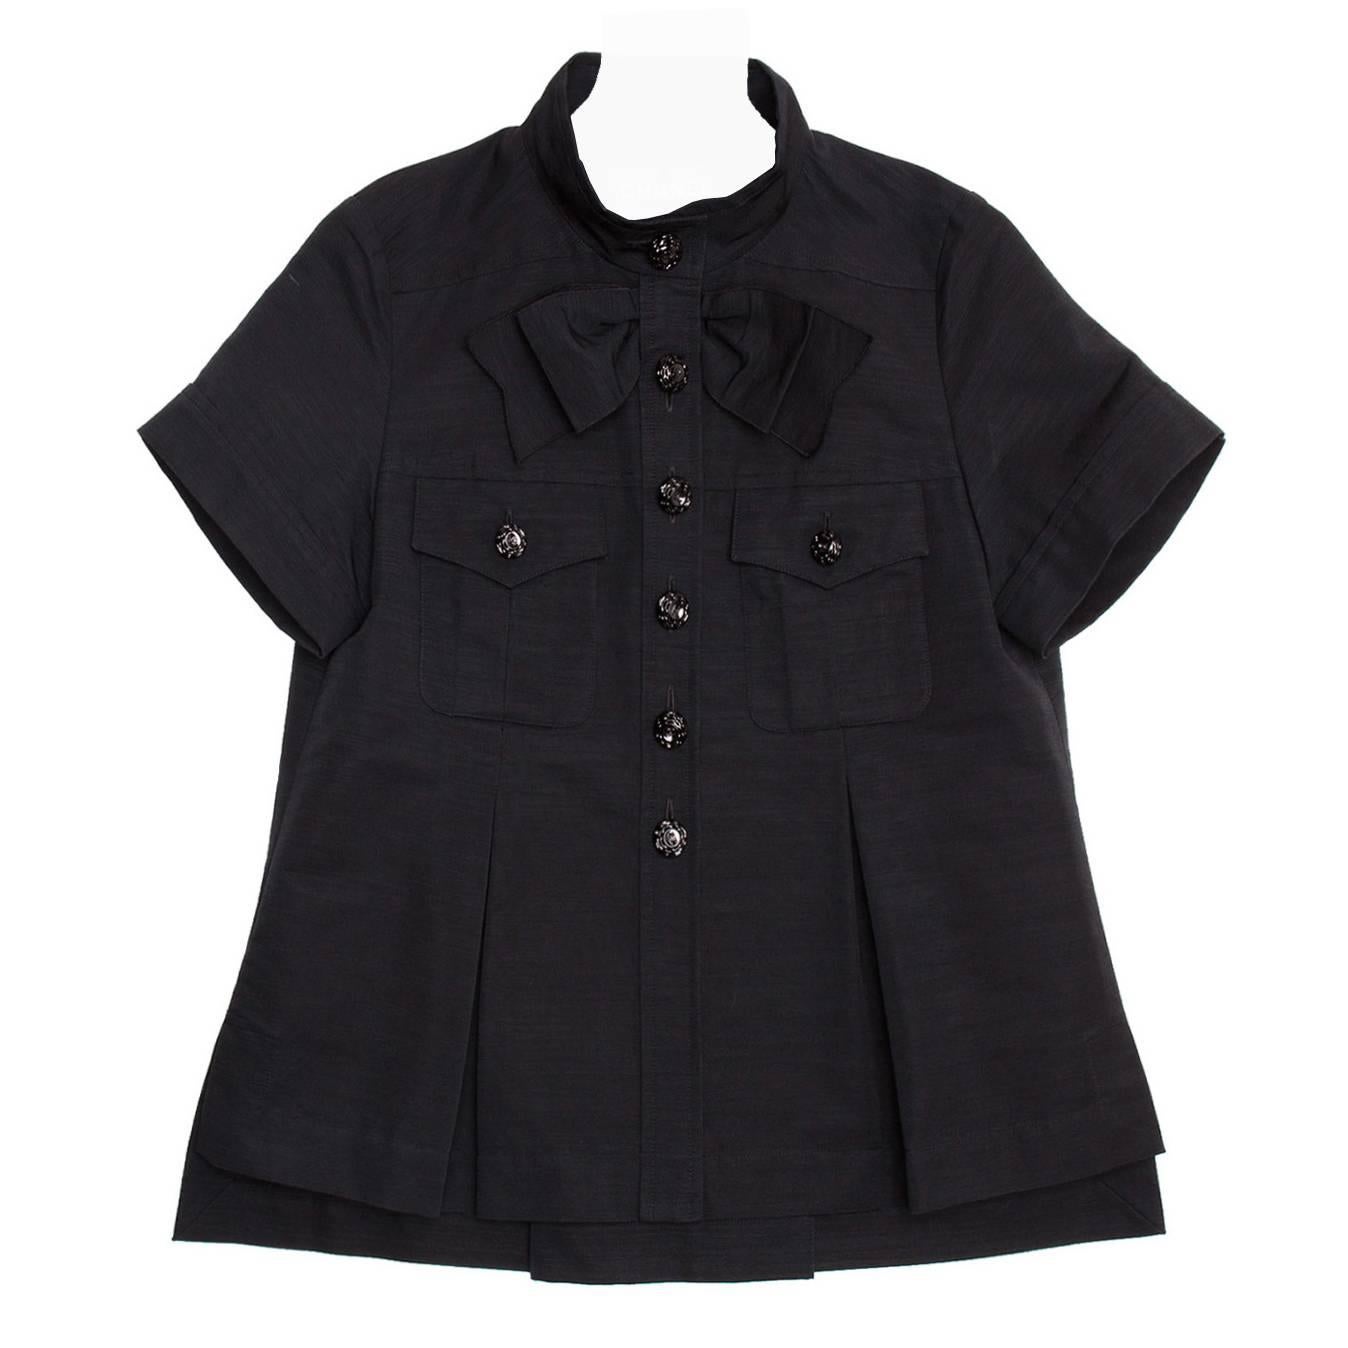 Chanel Black Cotton Shirt Jacket Style With Bow Detail For Sale